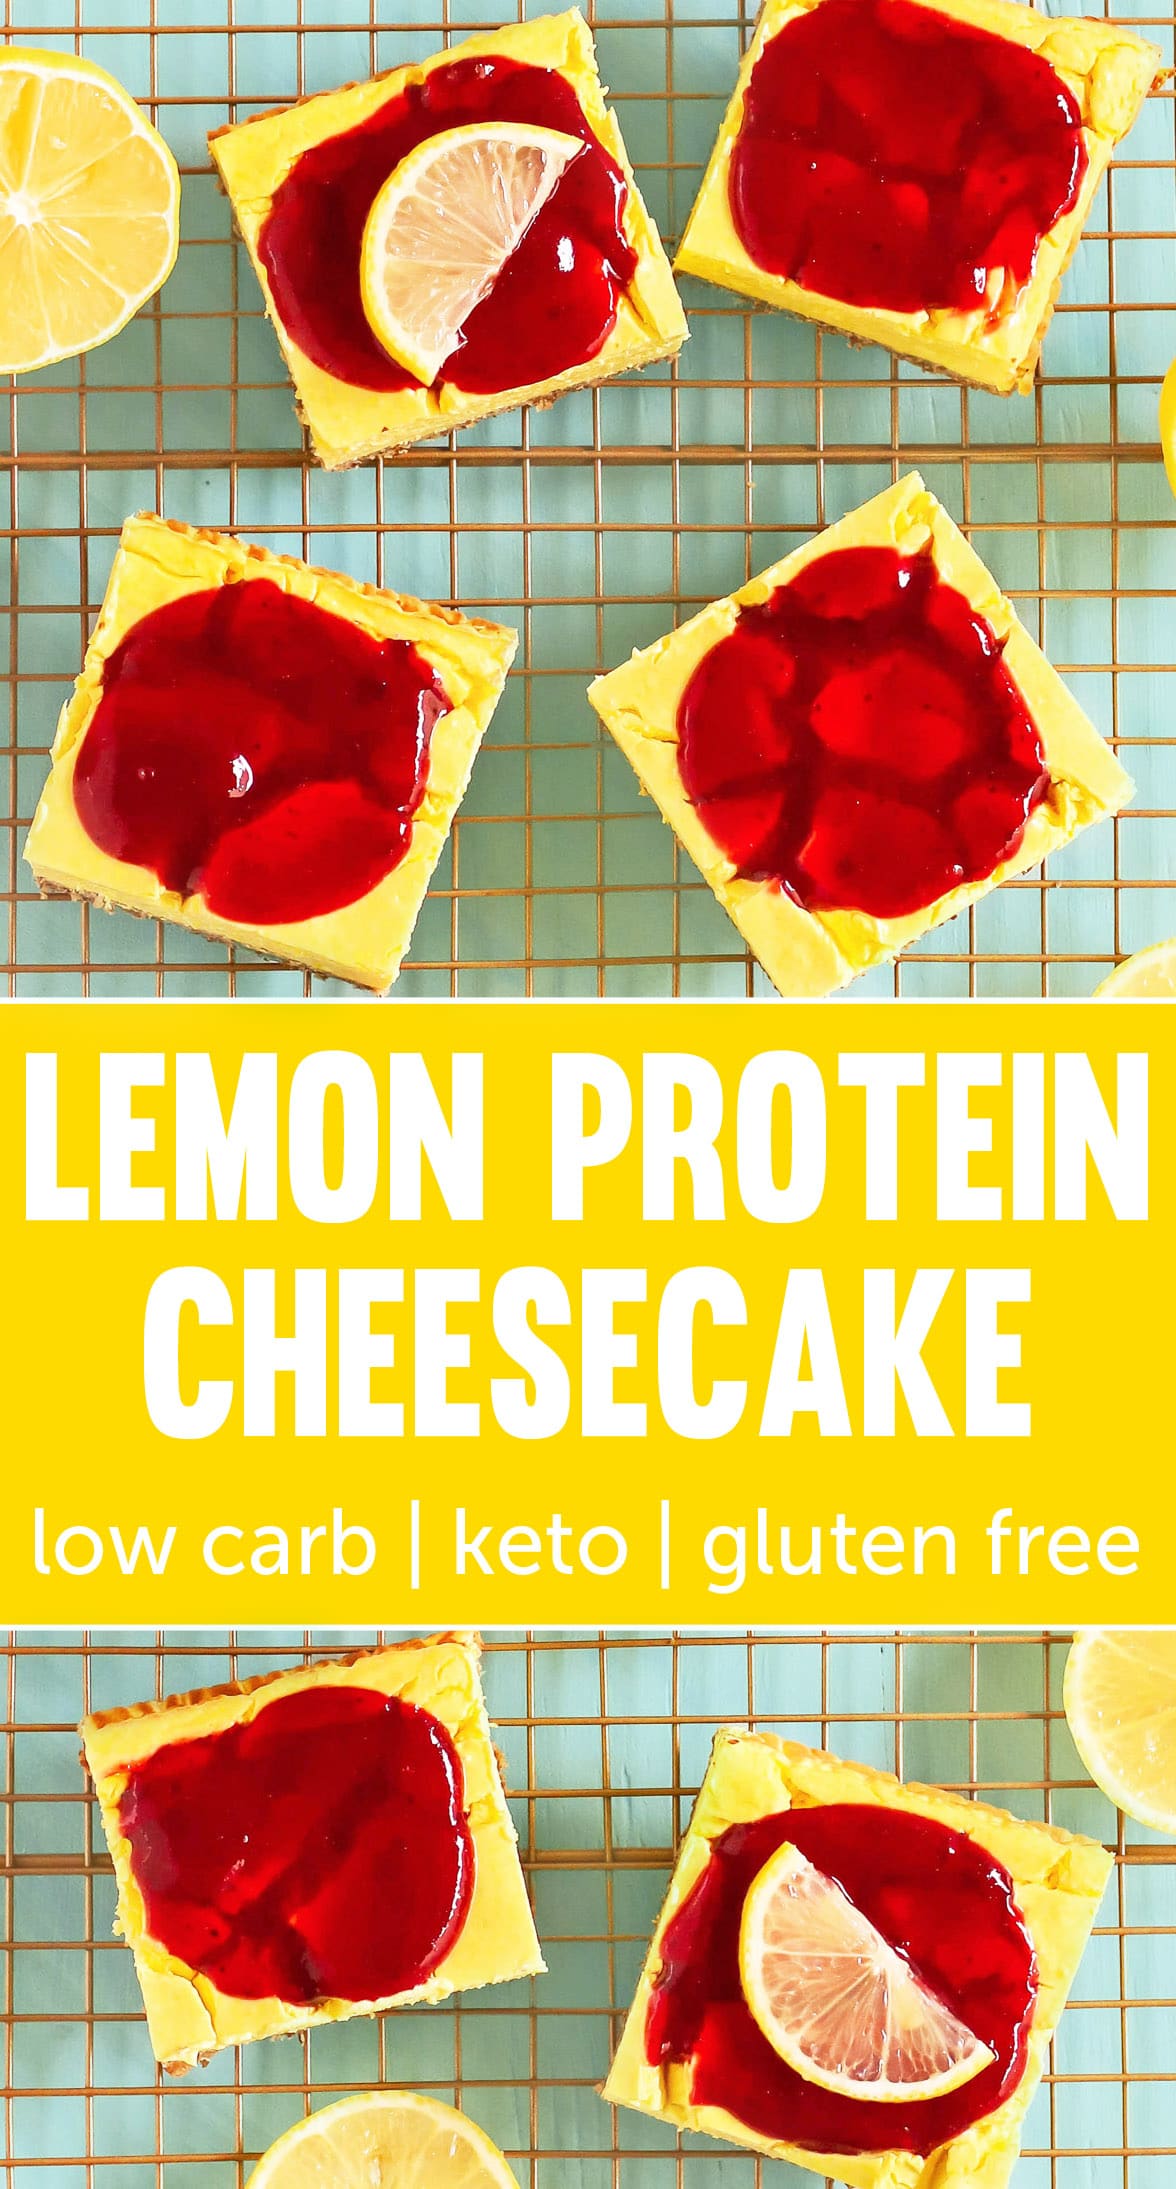 If you like cheesecake but don't want all the extra fat, calories, and sugar, make these Lemon Cheesecake Bars! It's just as rich and tasty as the original, but it's secretly sugar free, low carb, high protein, gluten free, and keto-friendly too!